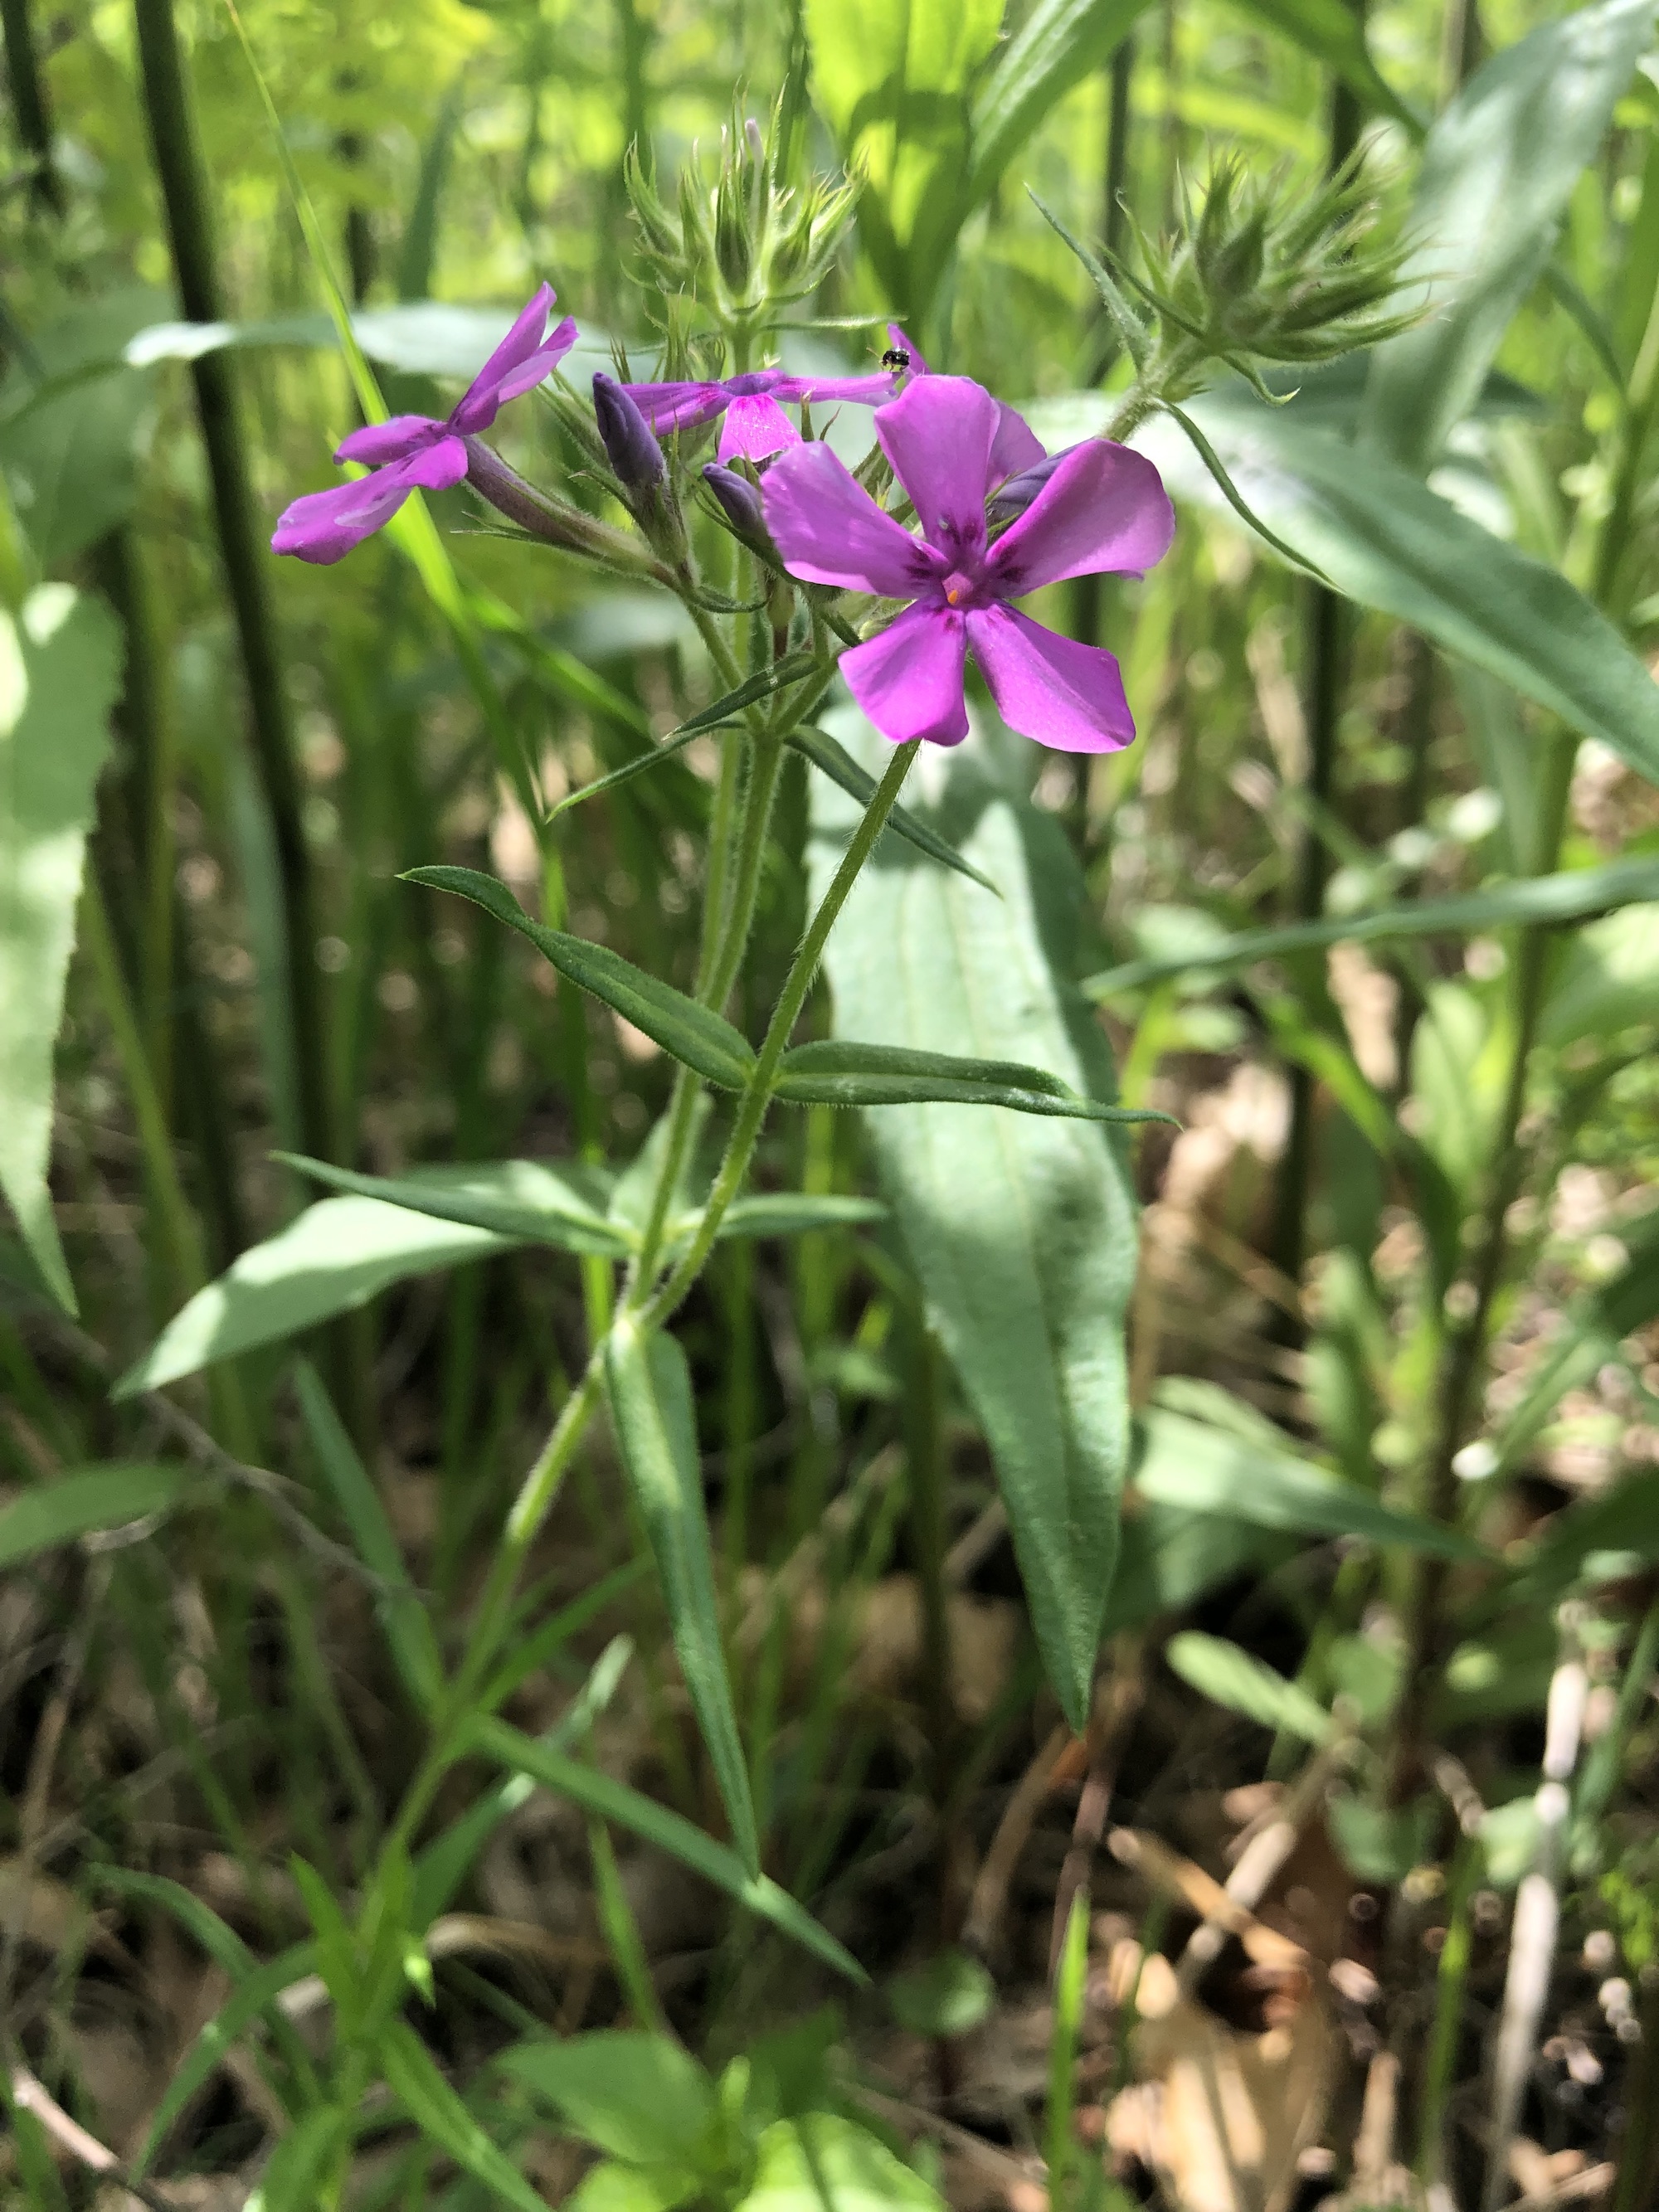 Prairie Phlox in the Curtis Prairie in the University of Wisconsin-Madison Arboretum in Madison, Wisconsin on May 30, 2022.